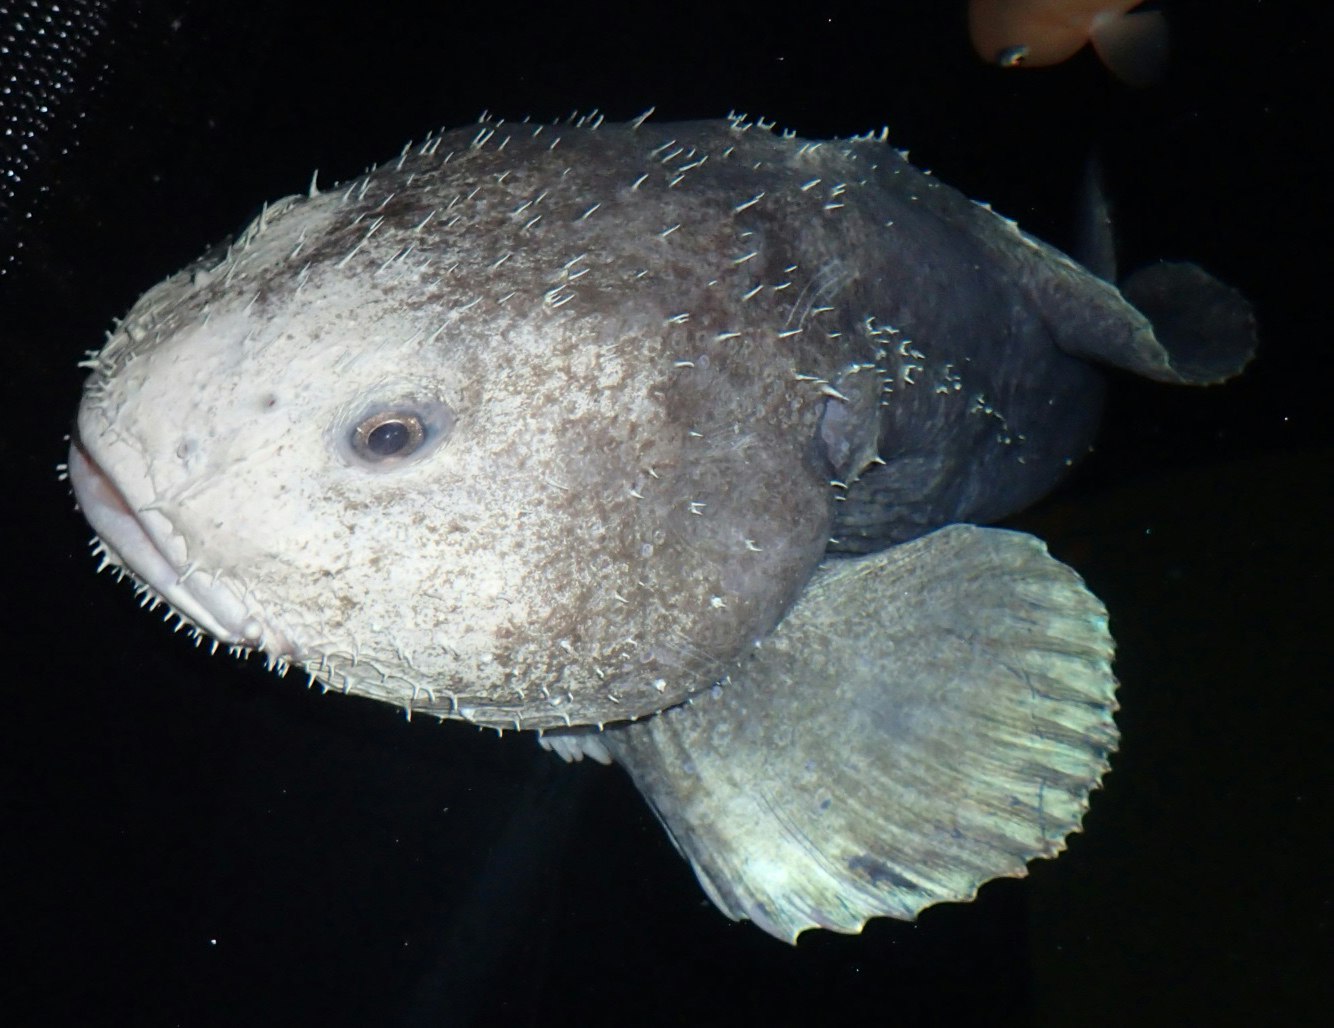 Bob the blobfish is living in a Japanese aquarium - Lonely Planet